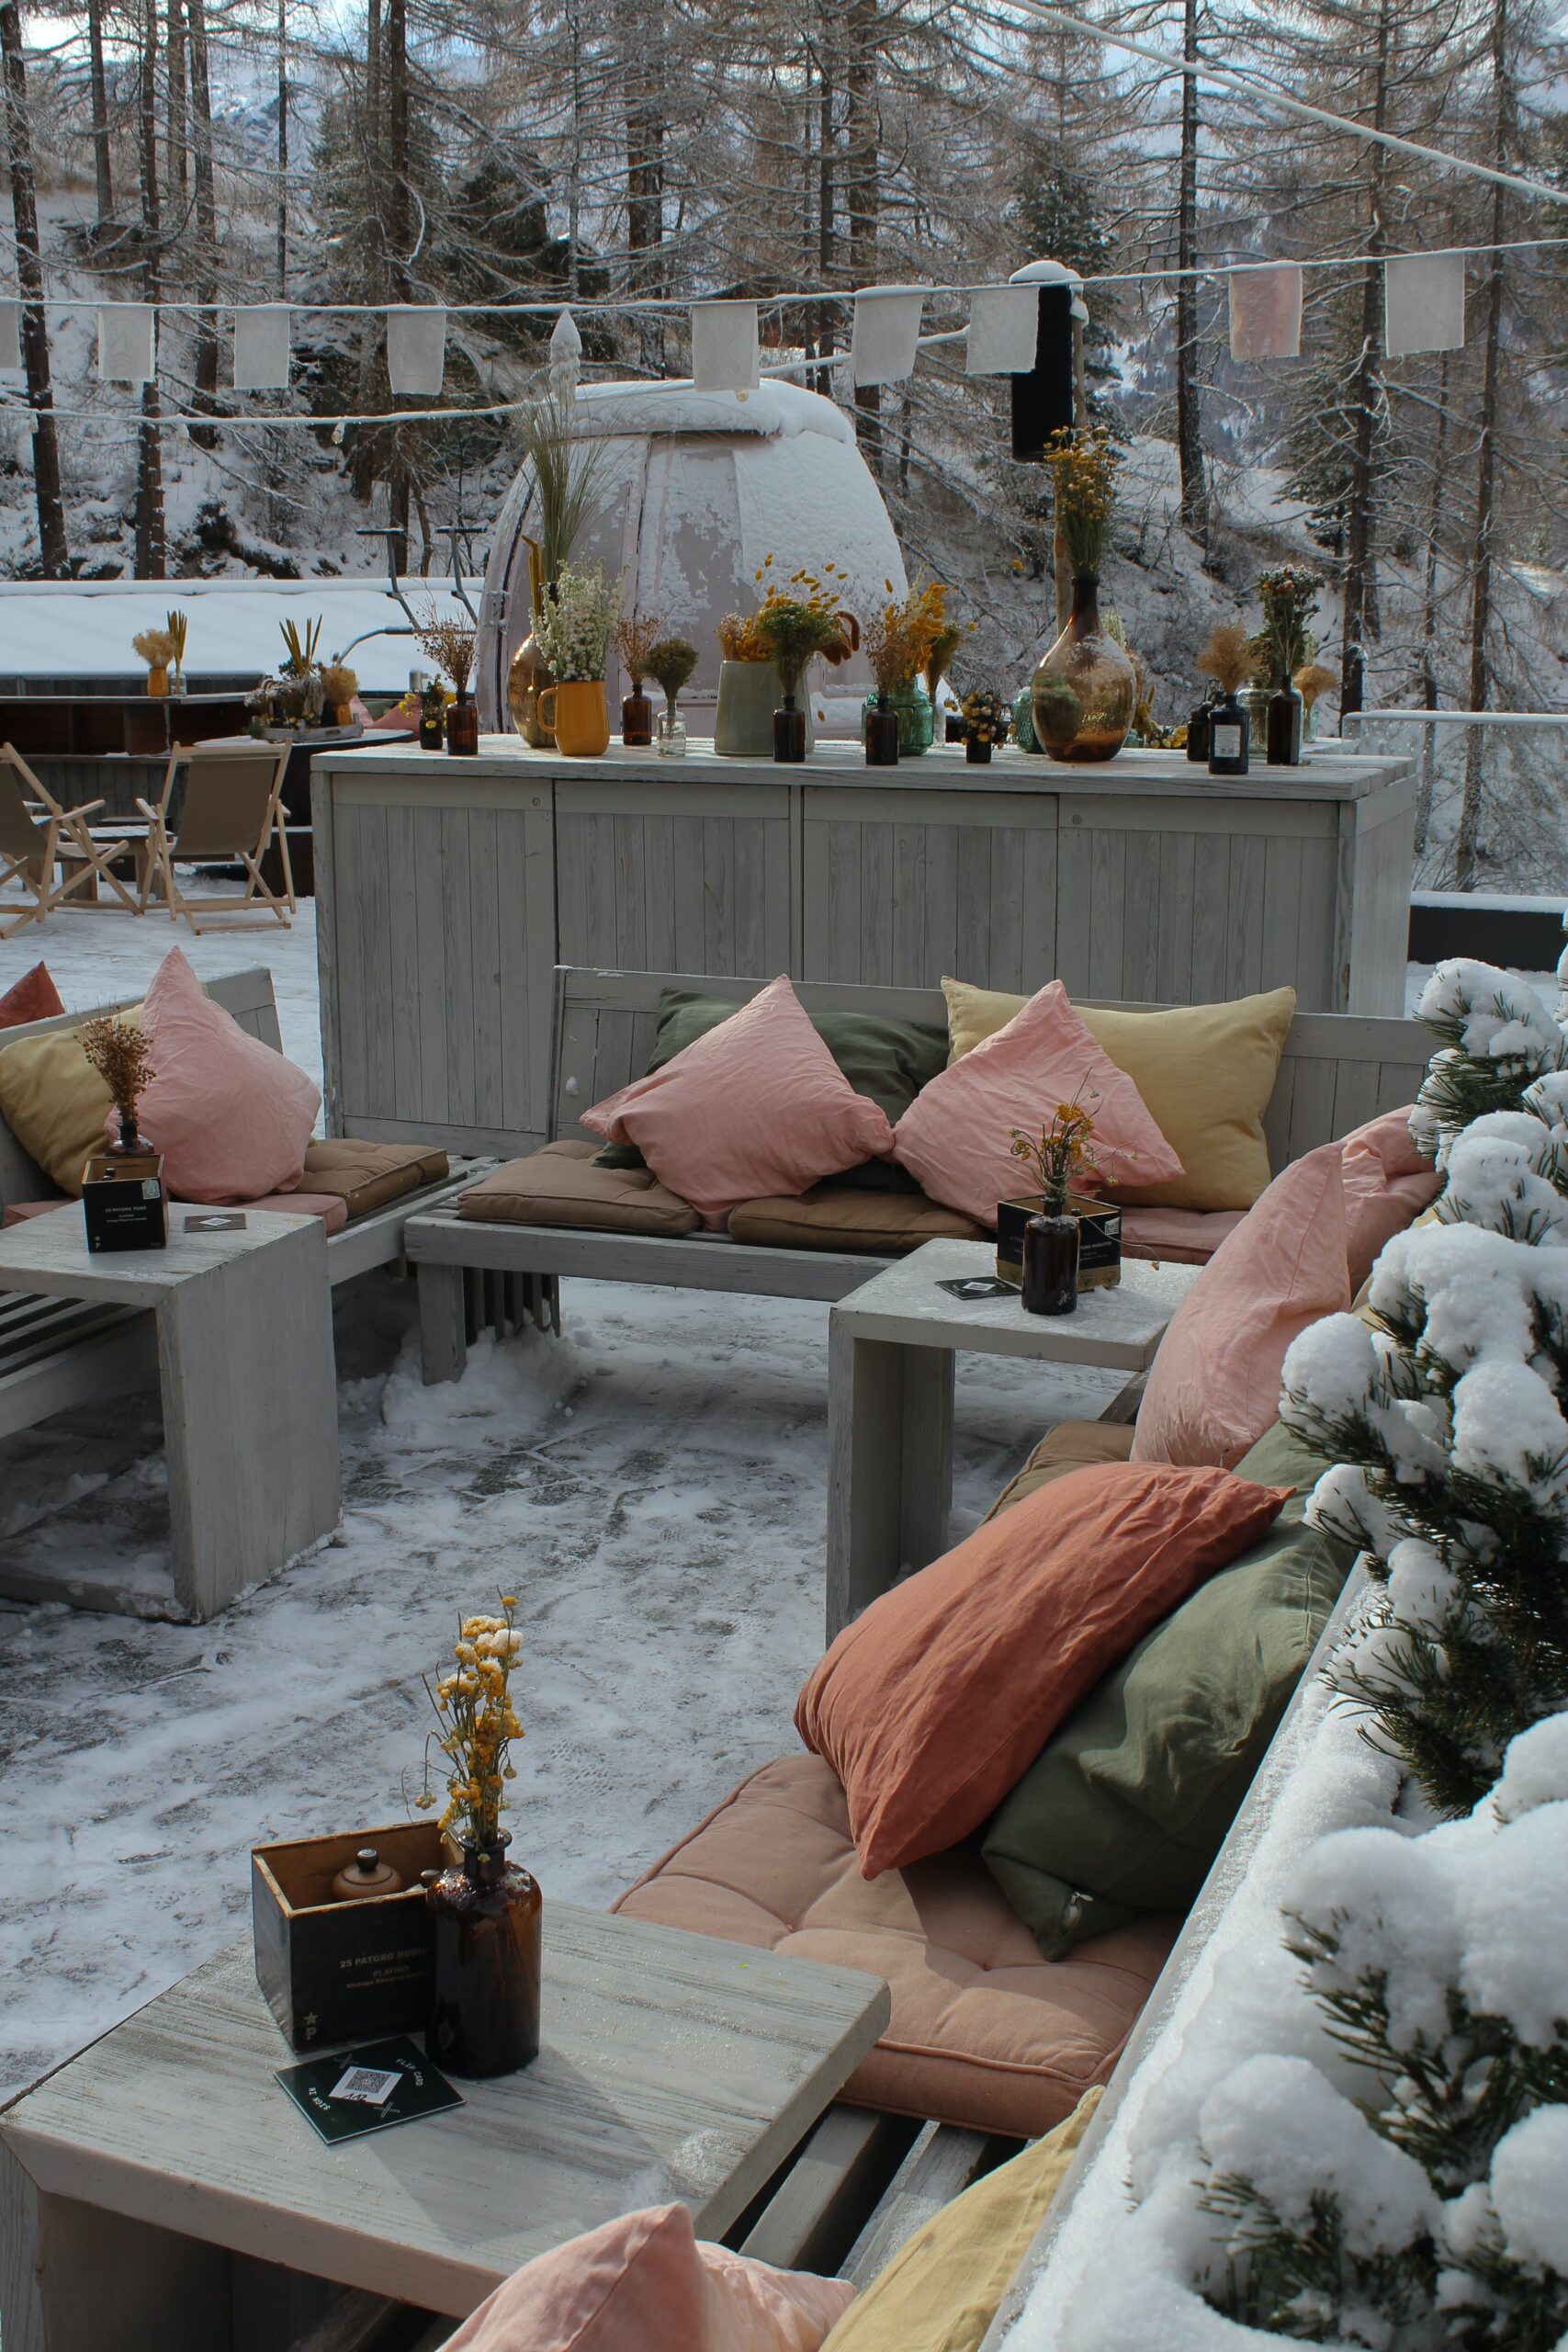 How to Store Patio Furniture in Winter